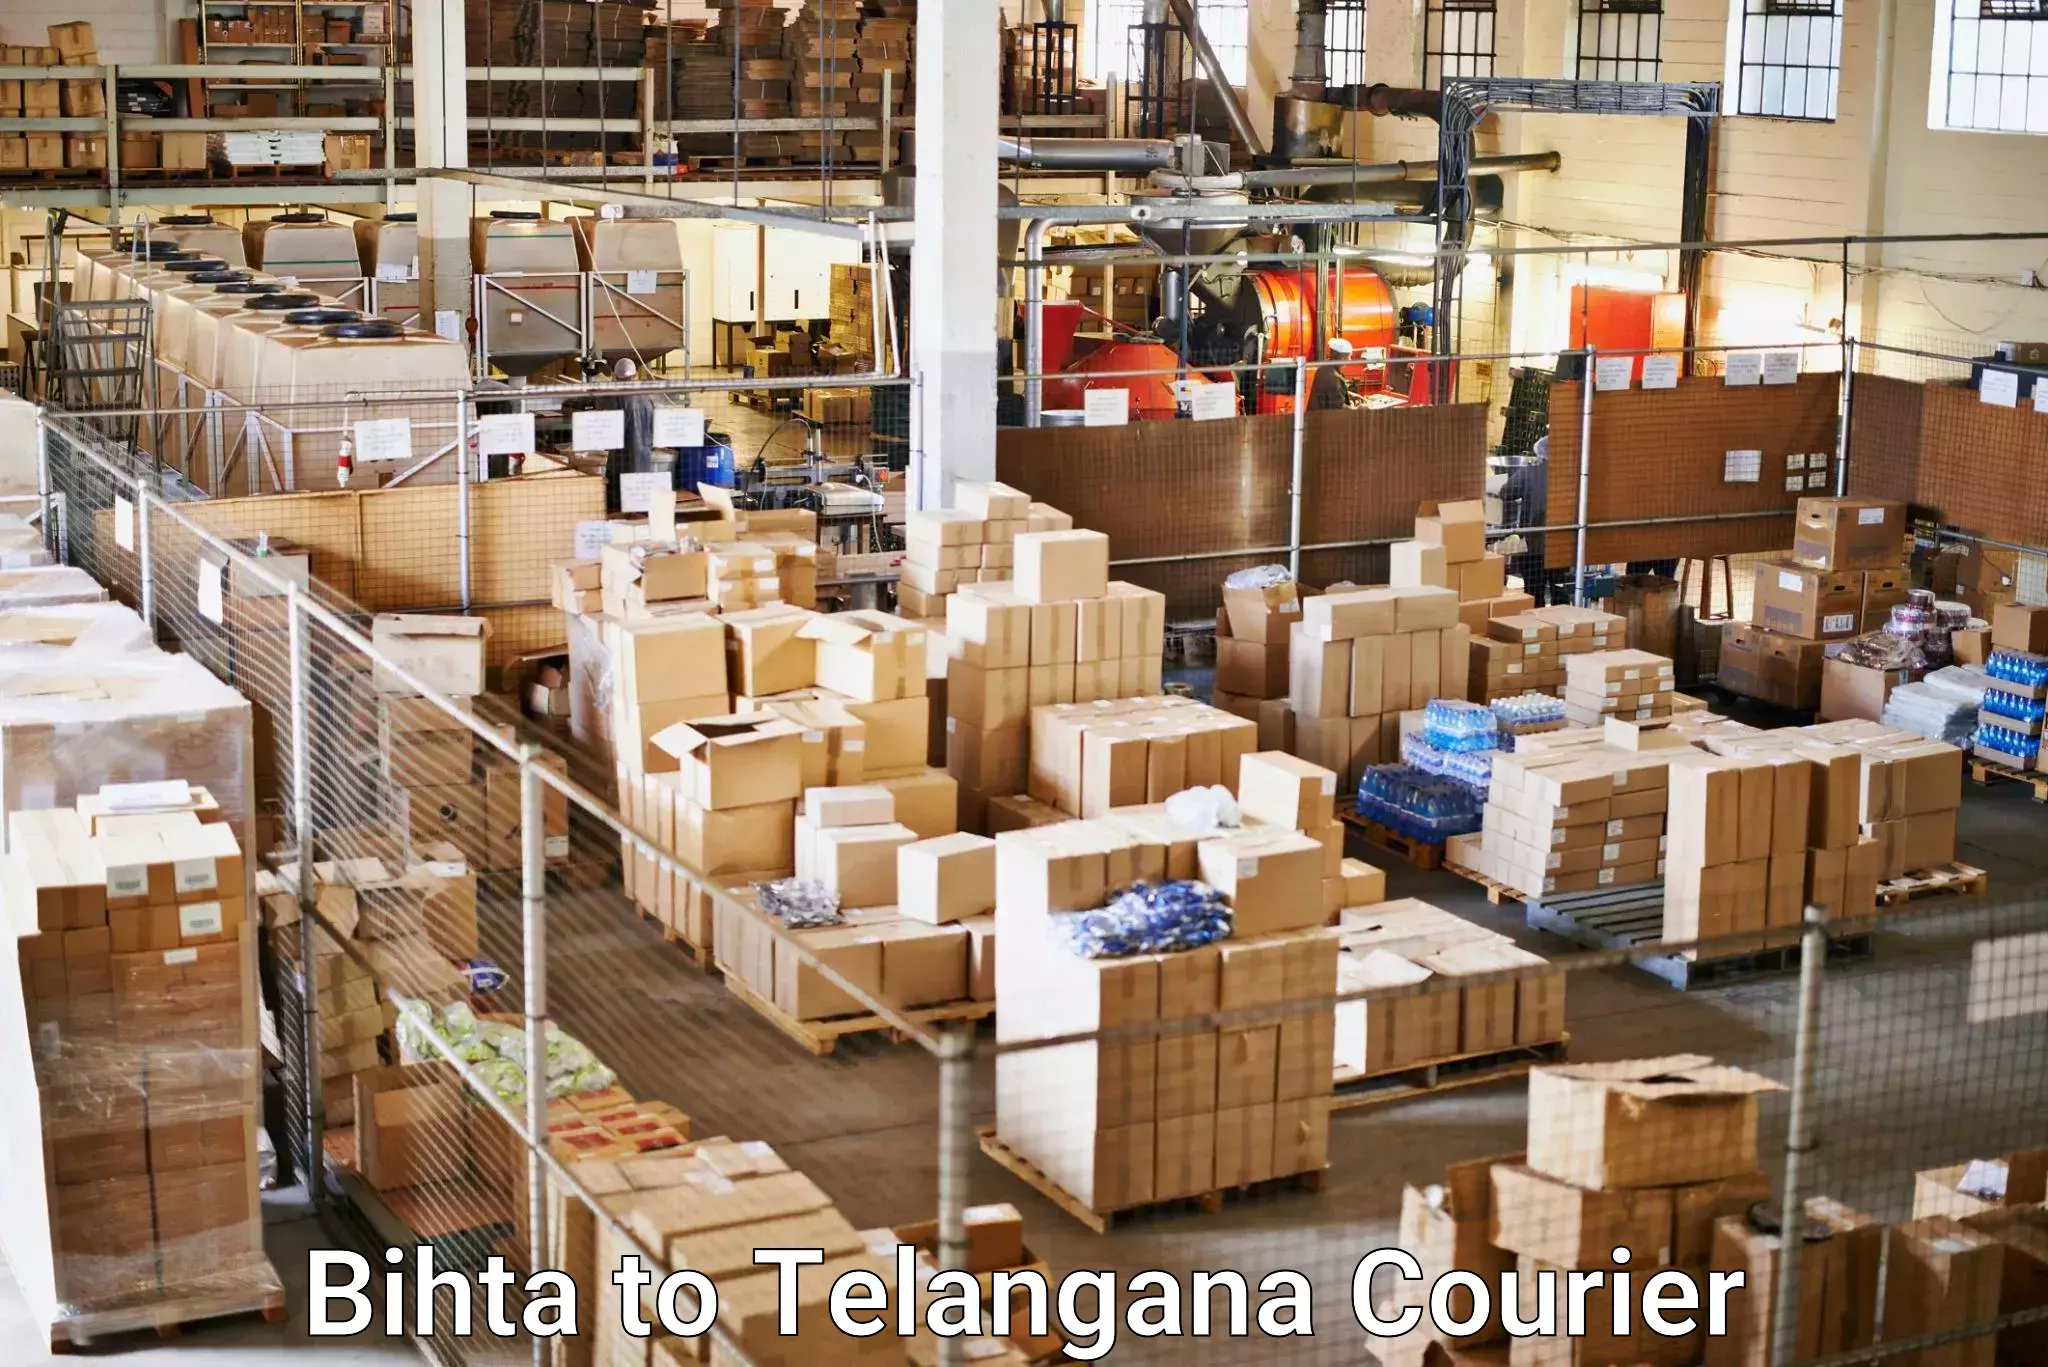 Reliable parcel services Bihta to Bejjanki